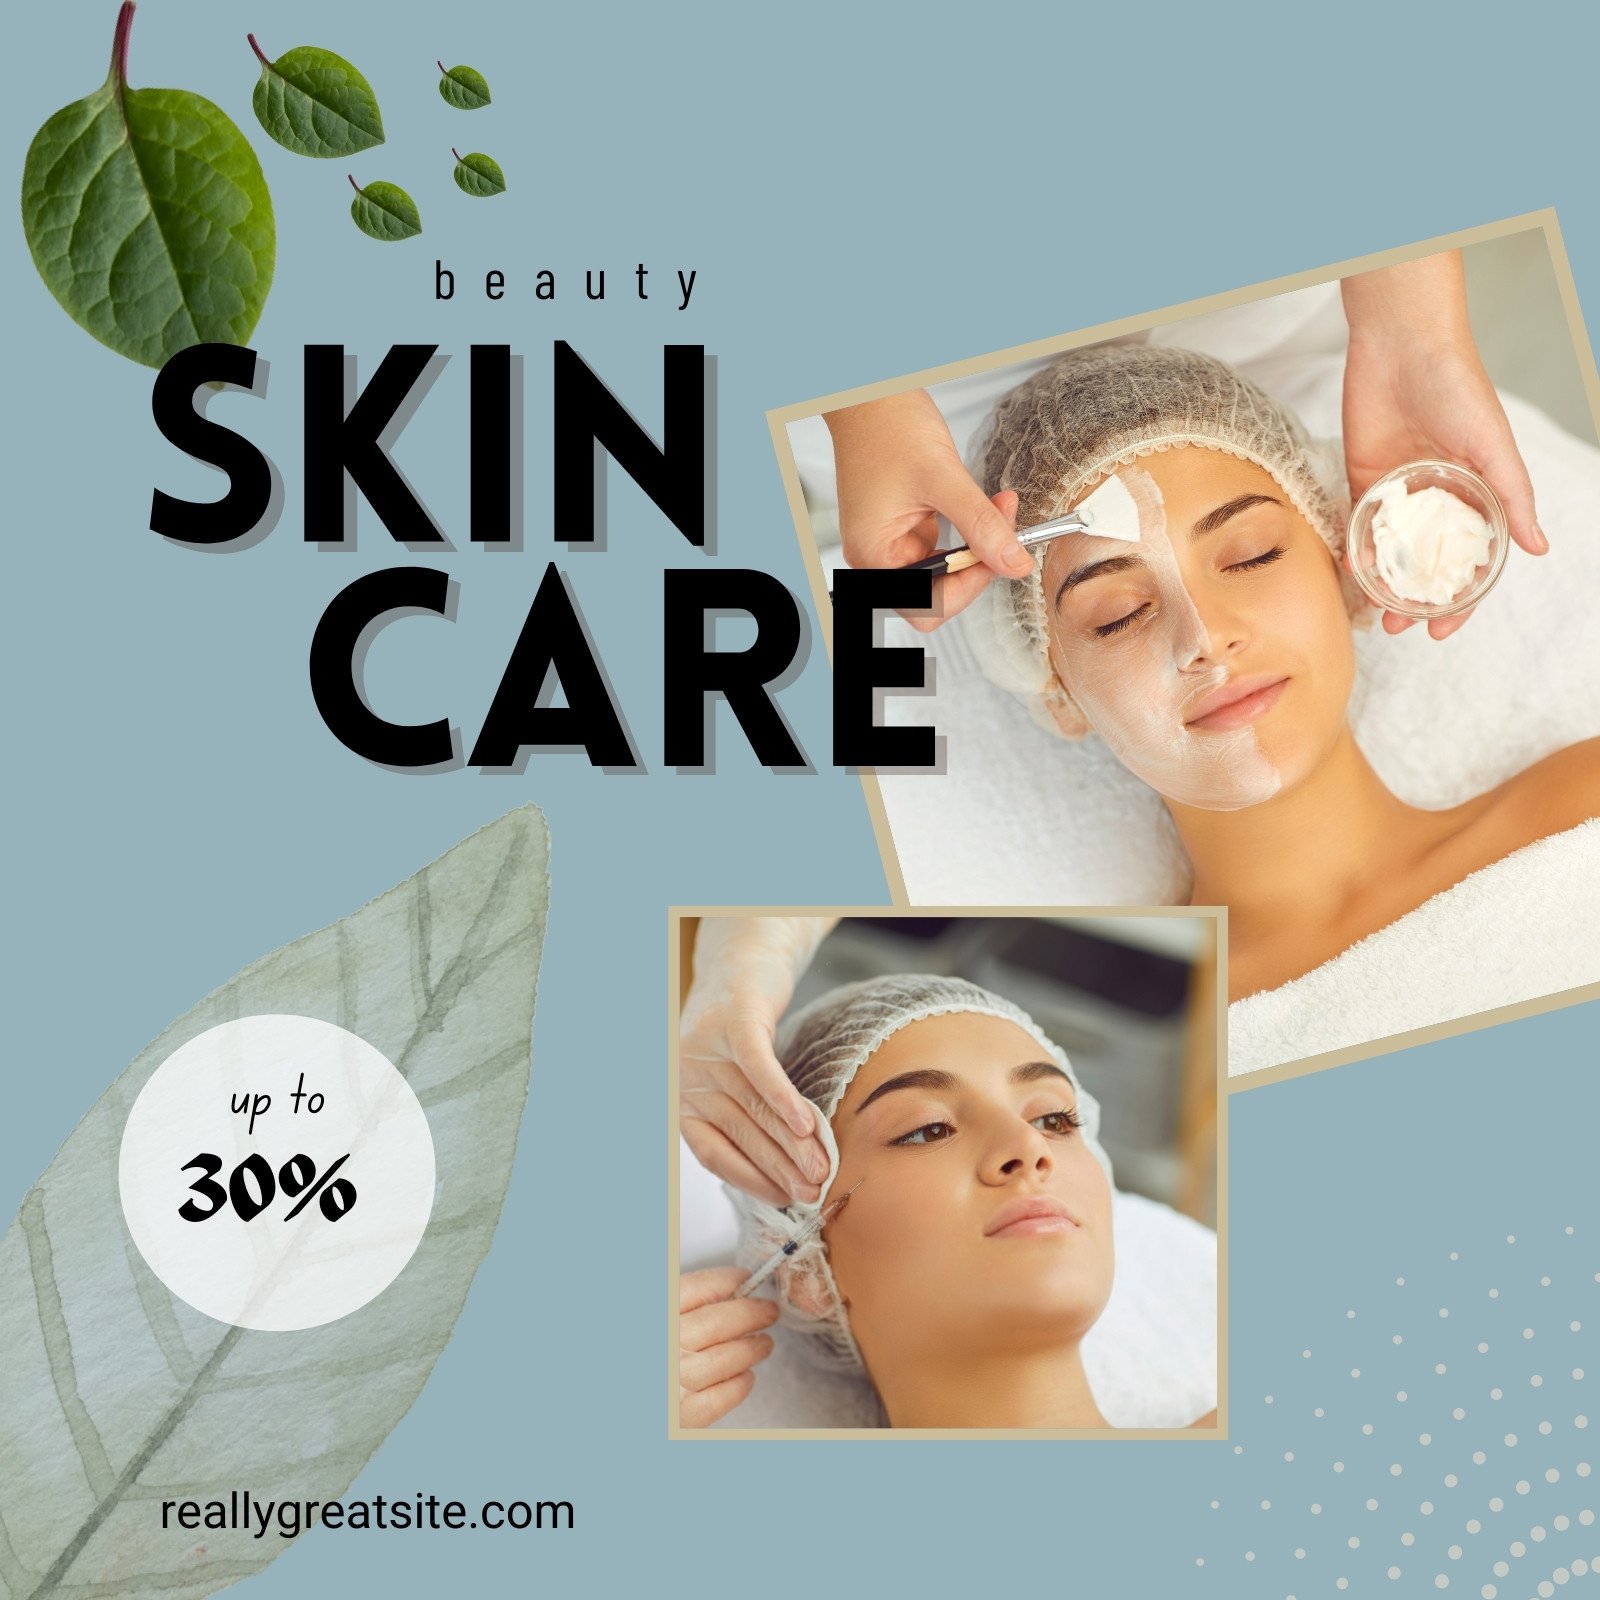 Free and customizable skin care templates